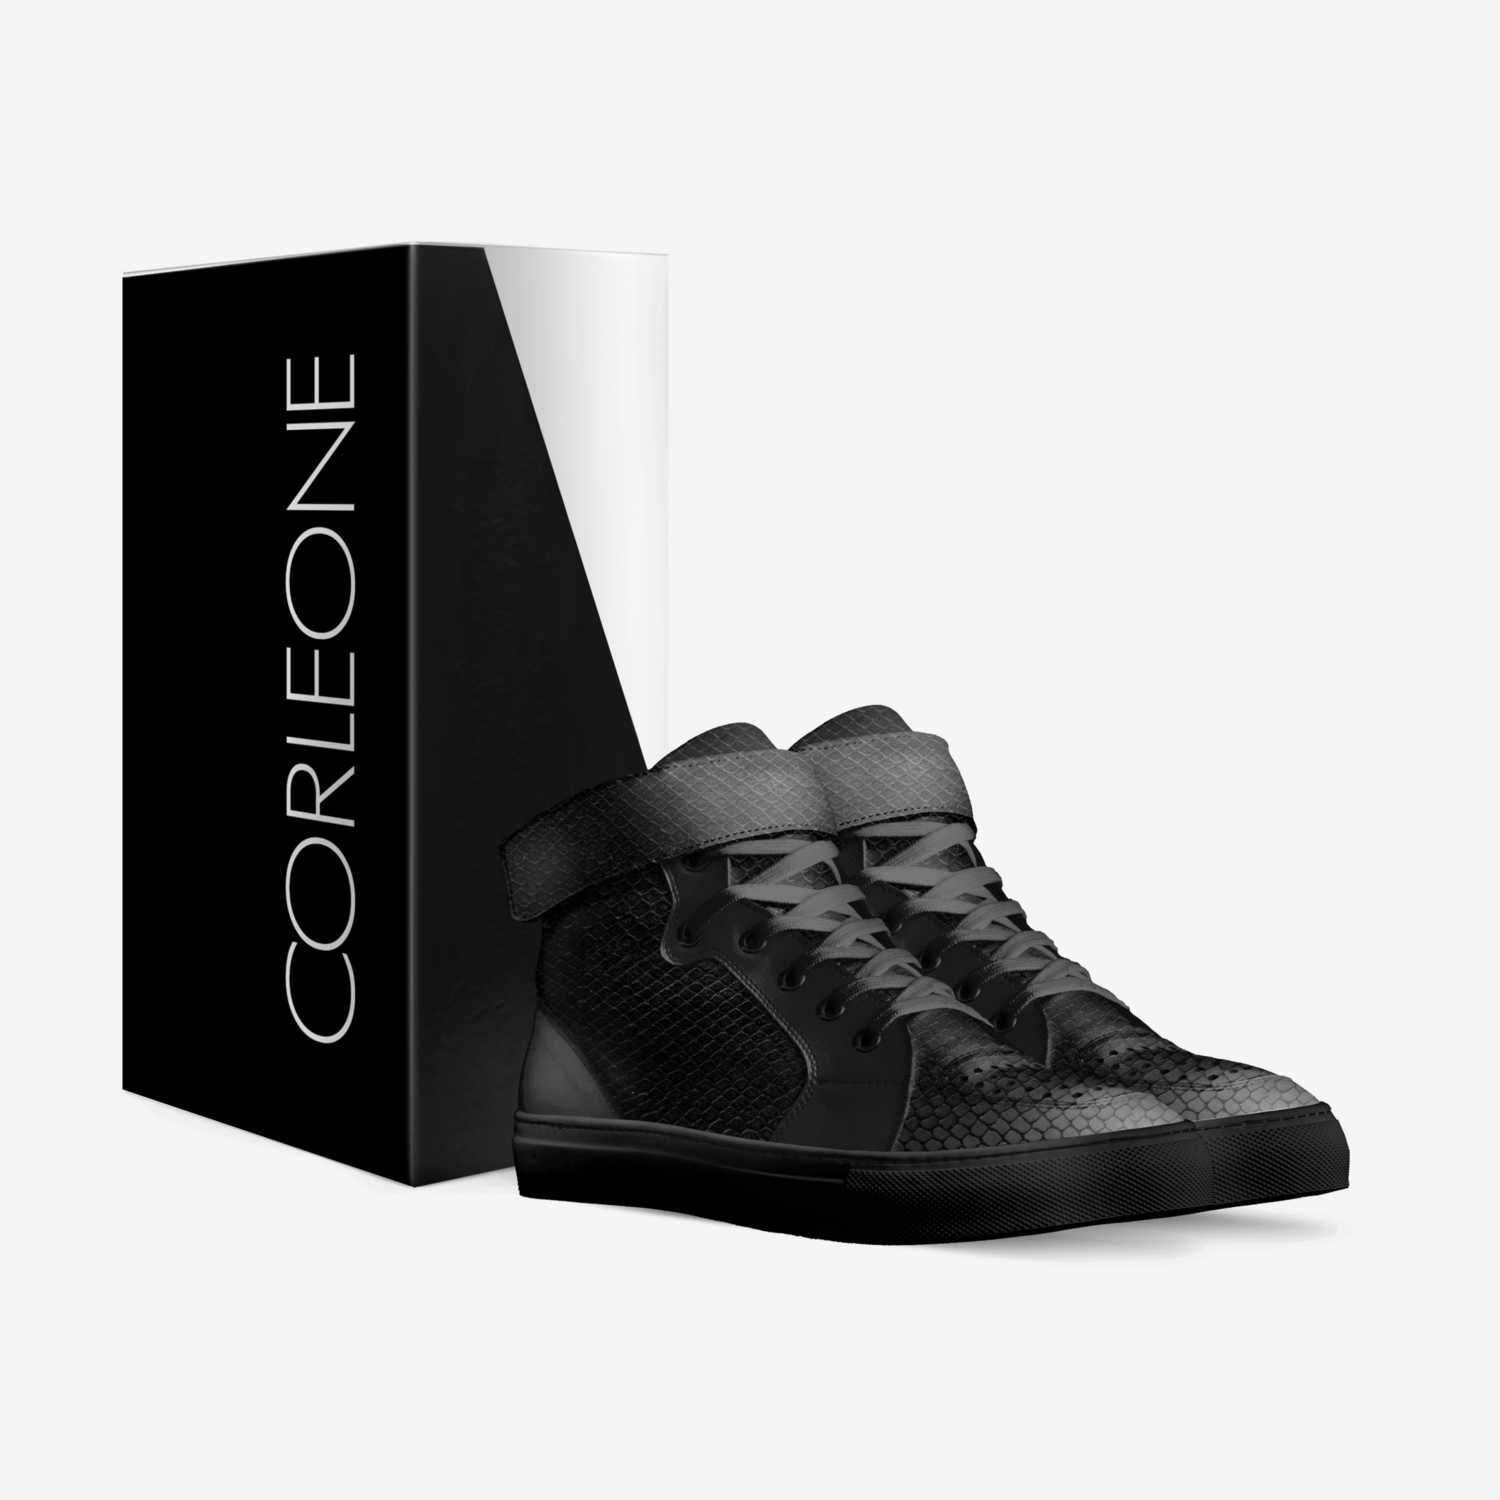 Corleone custom made in Italy shoes by Francisco Morales | Box view